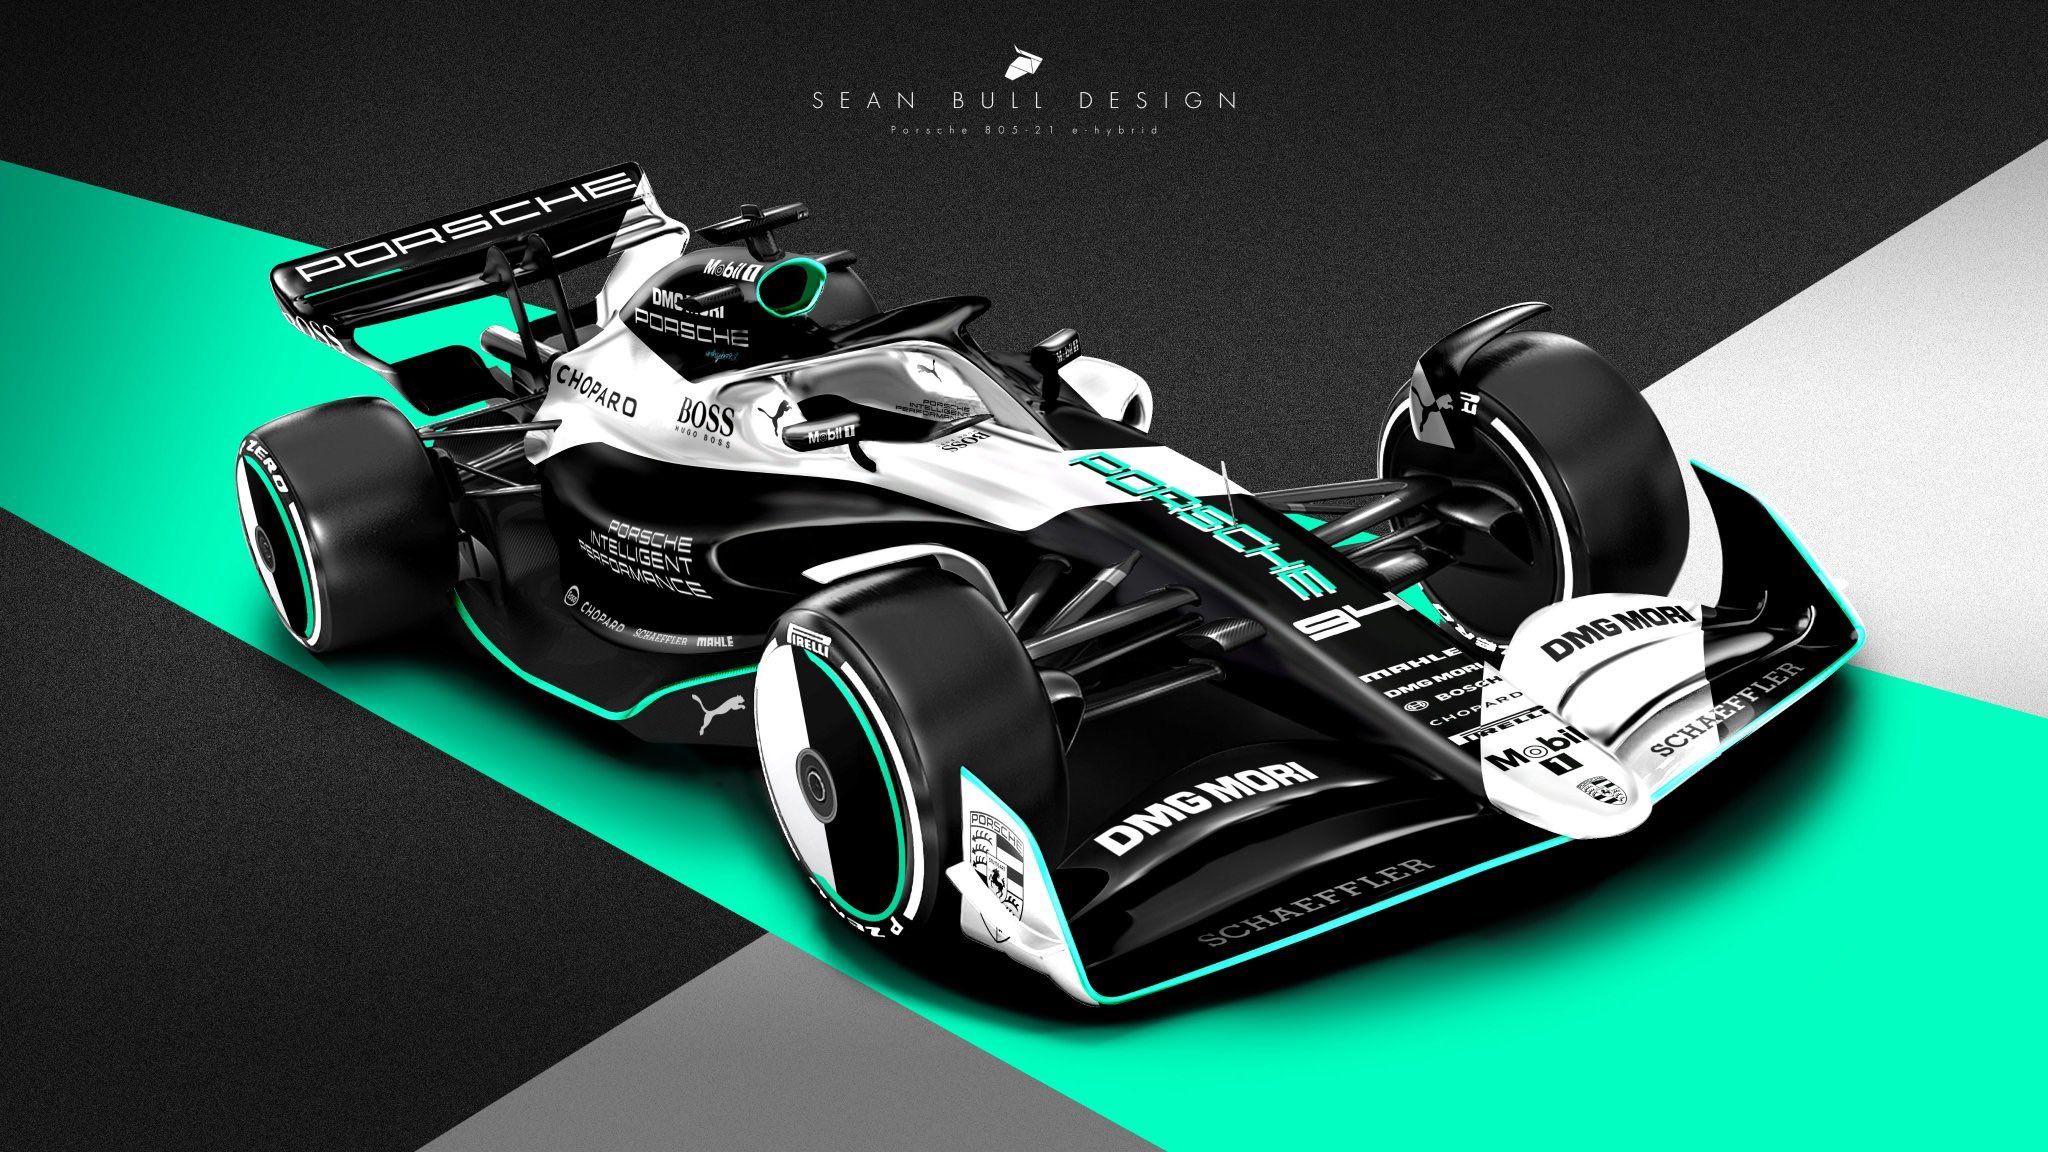 Sean Bull Design 2022 Concept Liveries. What do you think about the new shape cars? #F1 #Formula1 #F12020 #LiveryDesign